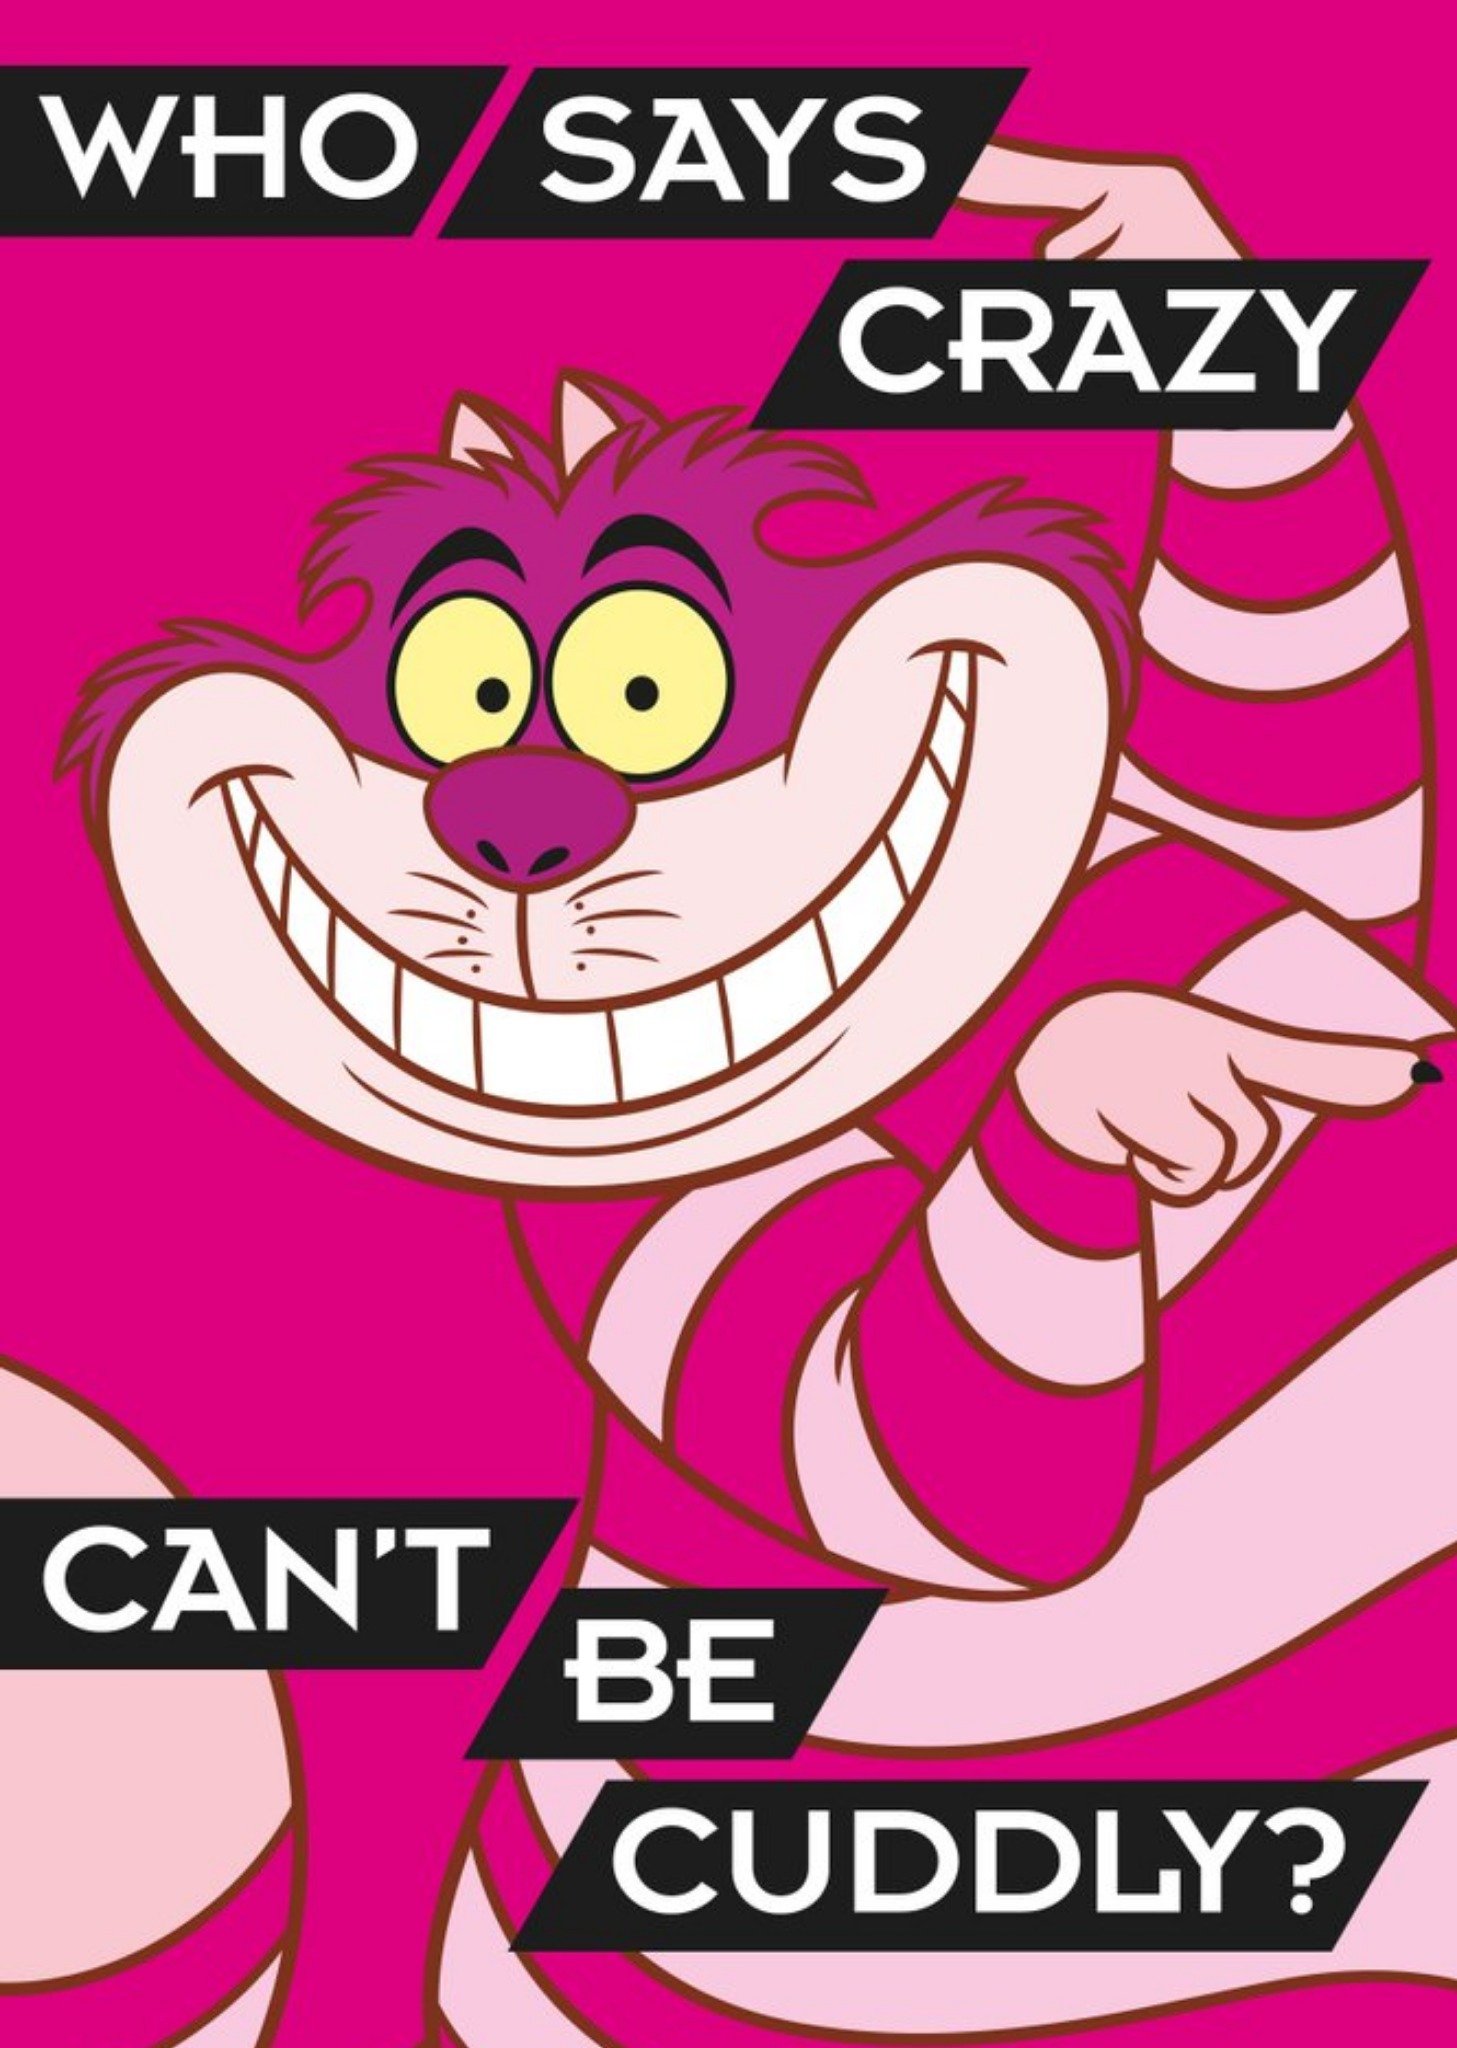 Disney Alice In Wonderland Cheshire Cat Who Says Crazy Cant Be Cuddly Card Ecard